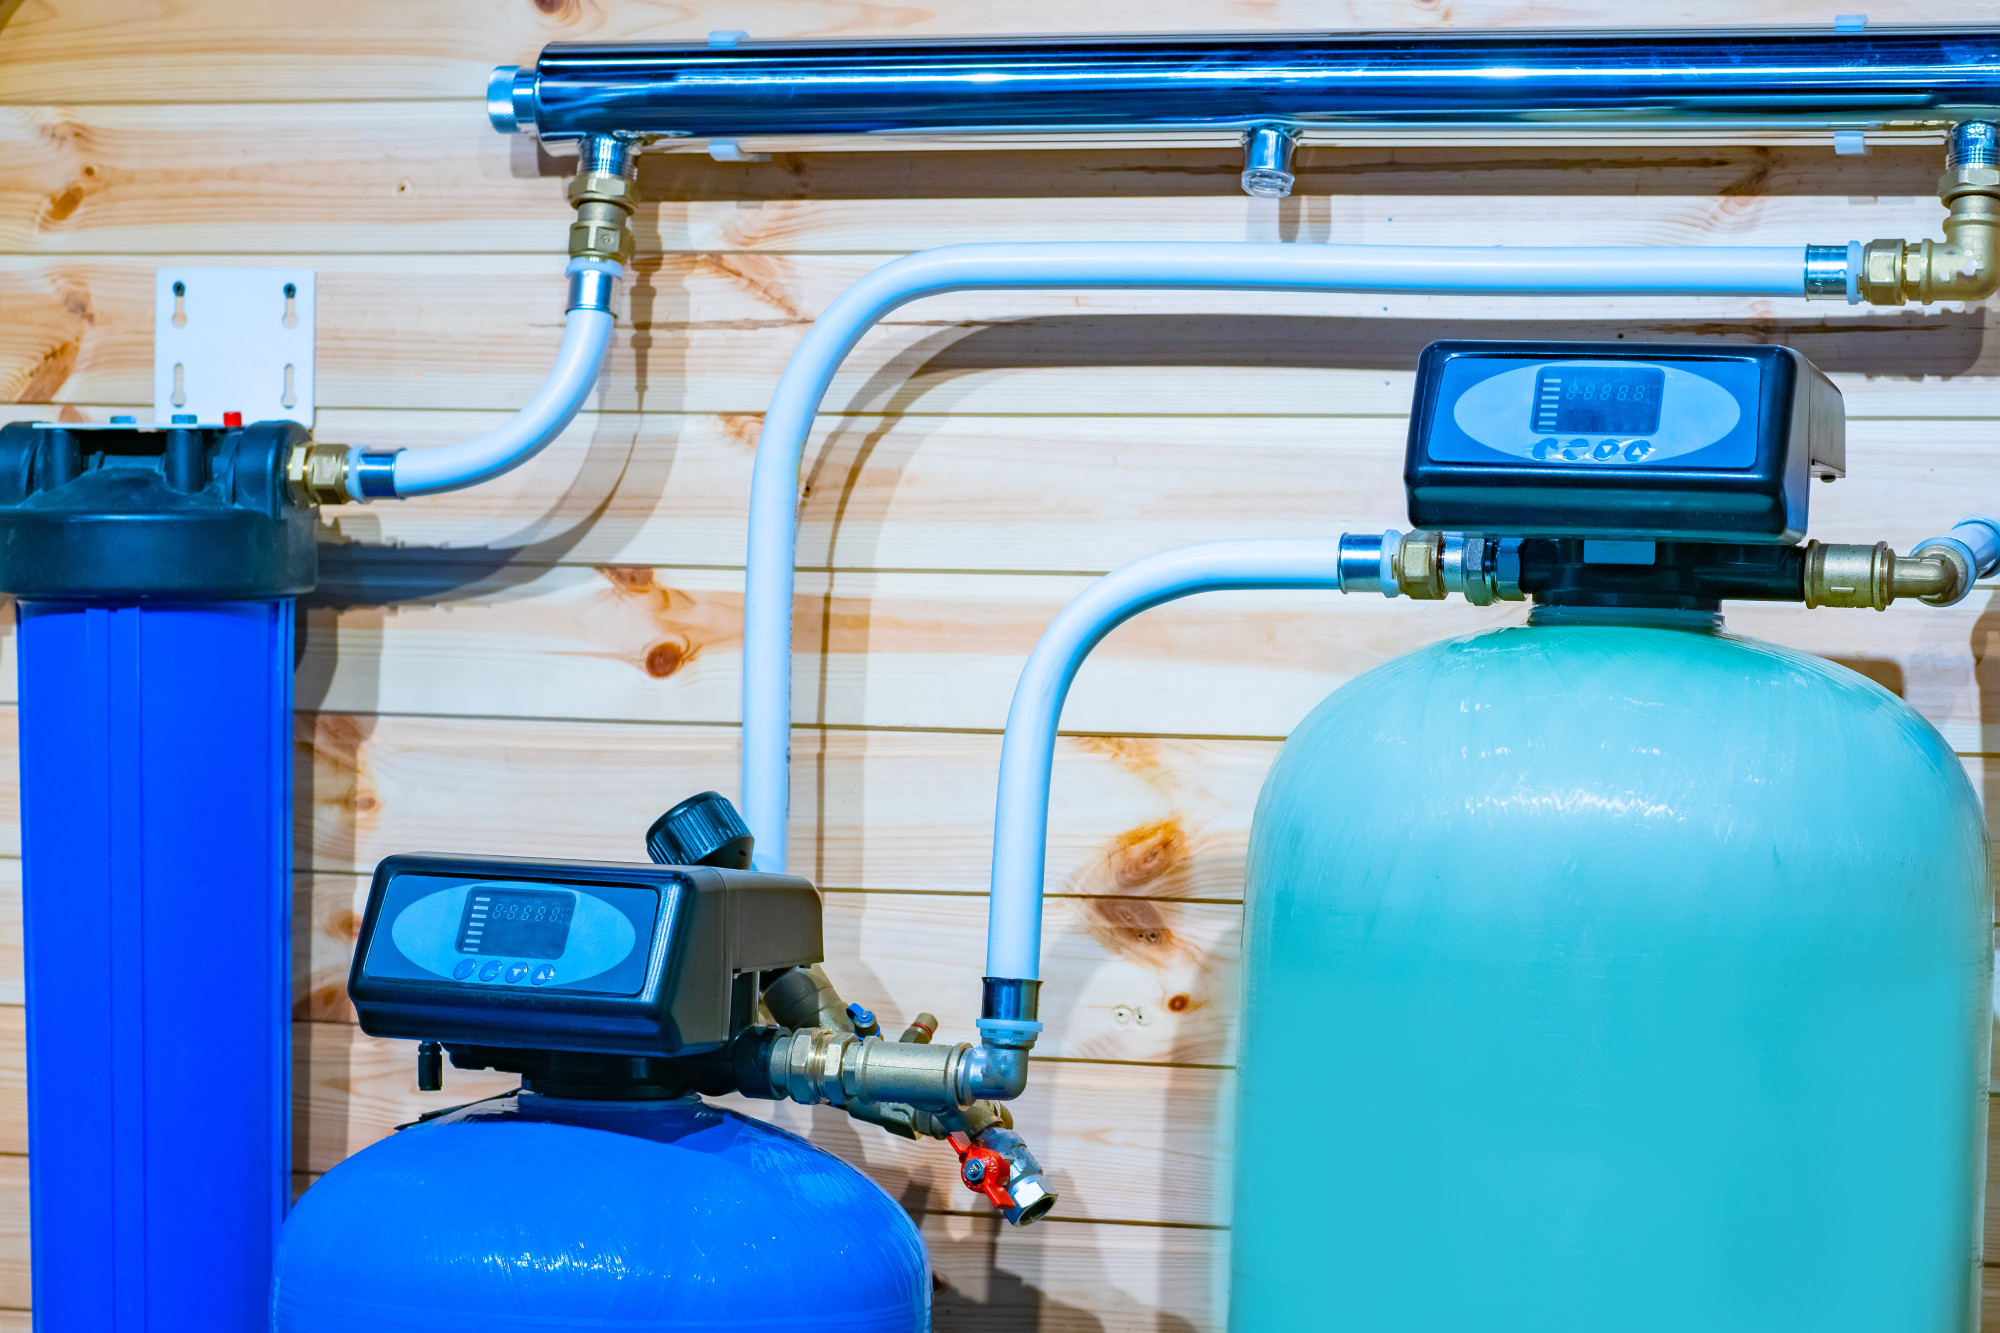 Inspection is an essential part of water heater maintenance. Read on to discover the importance of water heater inspection here.